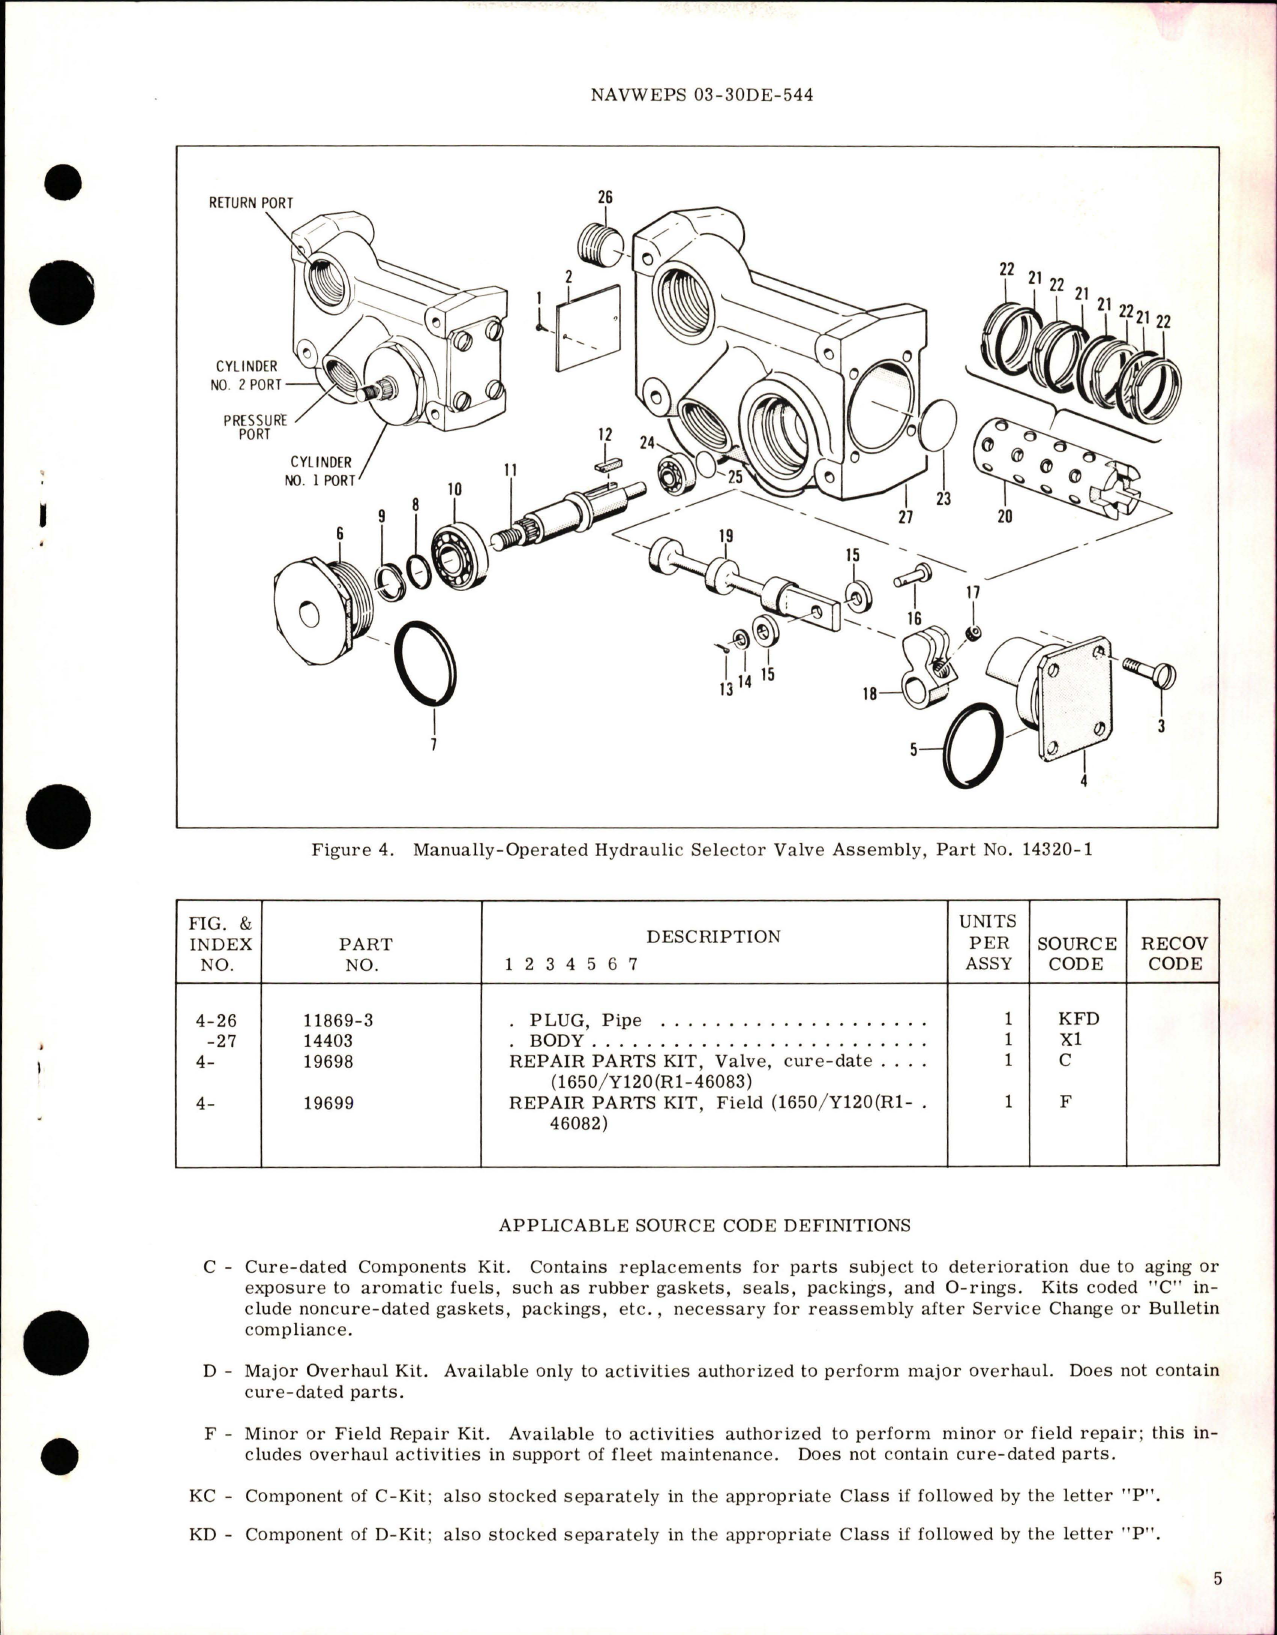 Sample page 5 from AirCorps Library document: Overhaul Instructions with Parts Breakdown for Manually-Operated Hydraulic Selector Valve - Part 14320-1